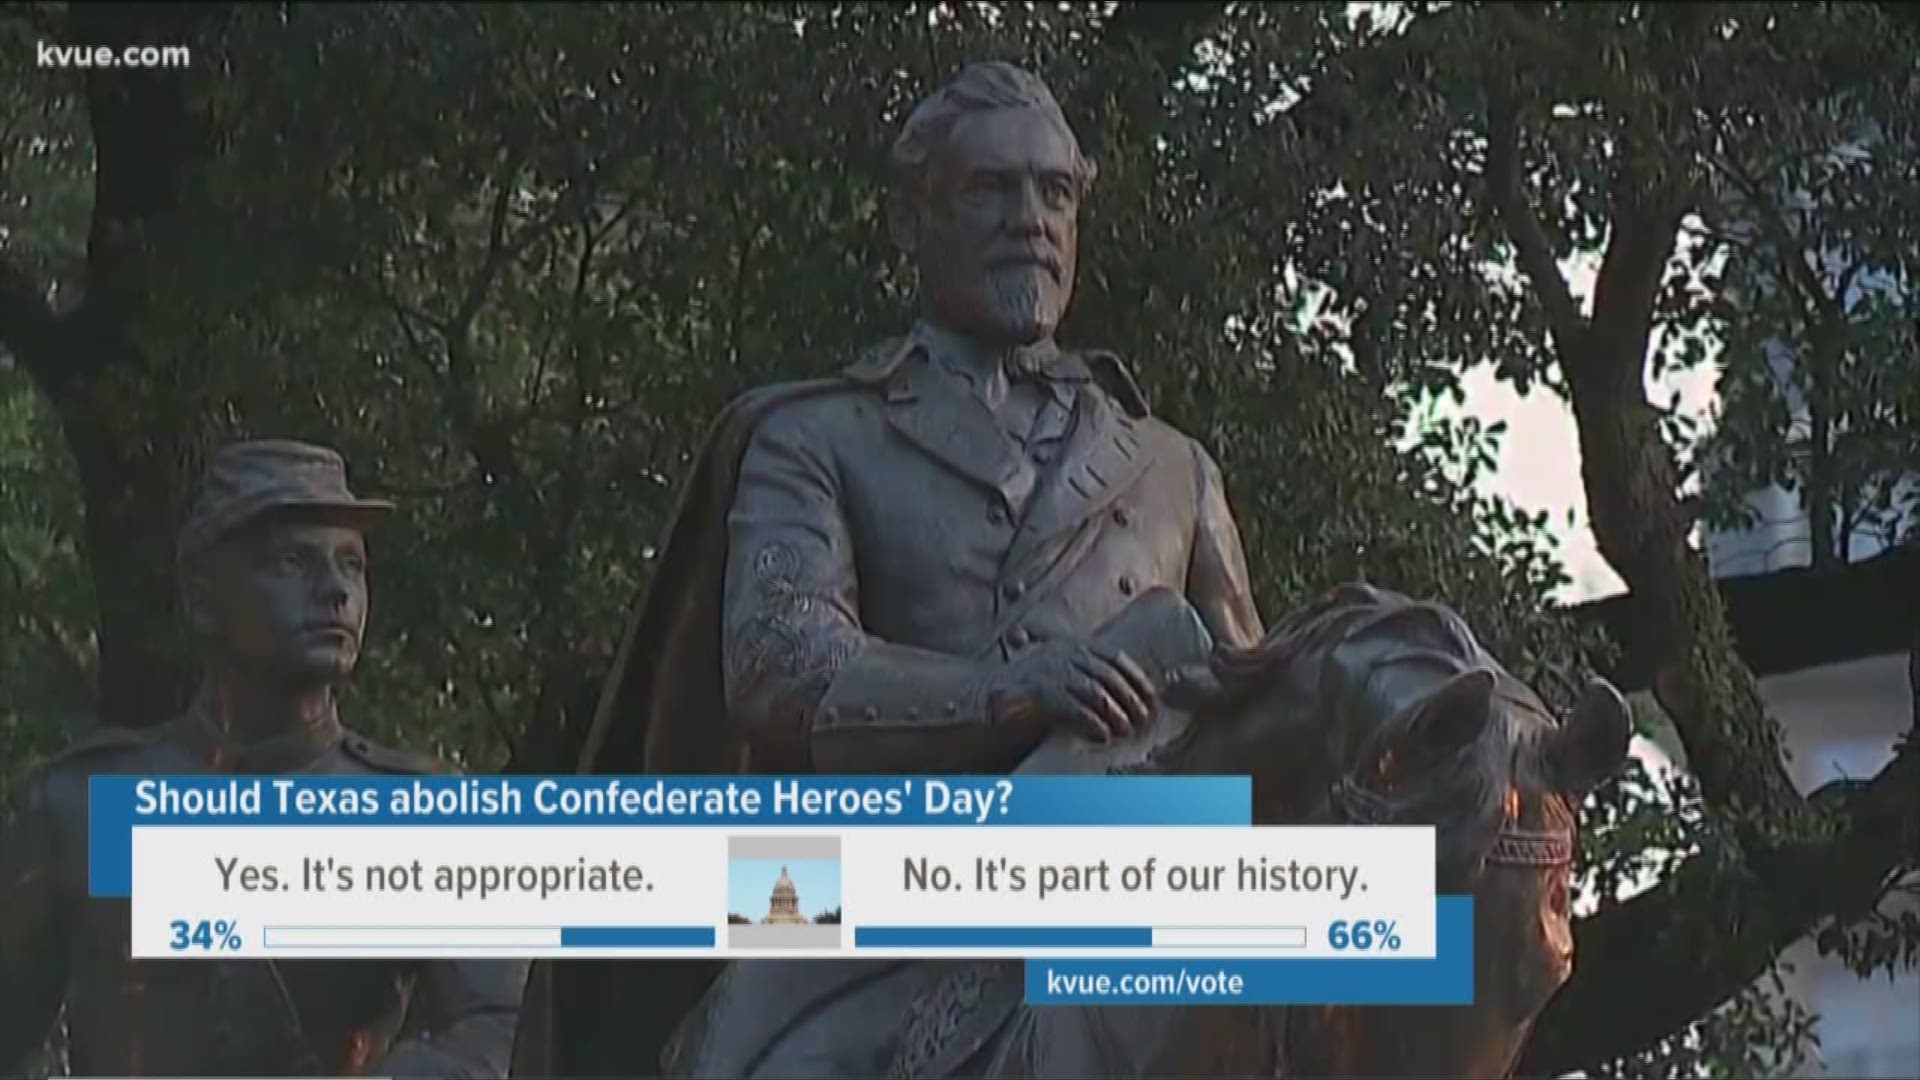 Seventeen-year-old Jacob Hale has partnered with Representative Jarvis Johnson, who is sponsoring a bill to abolish Confederate Heroes Day.